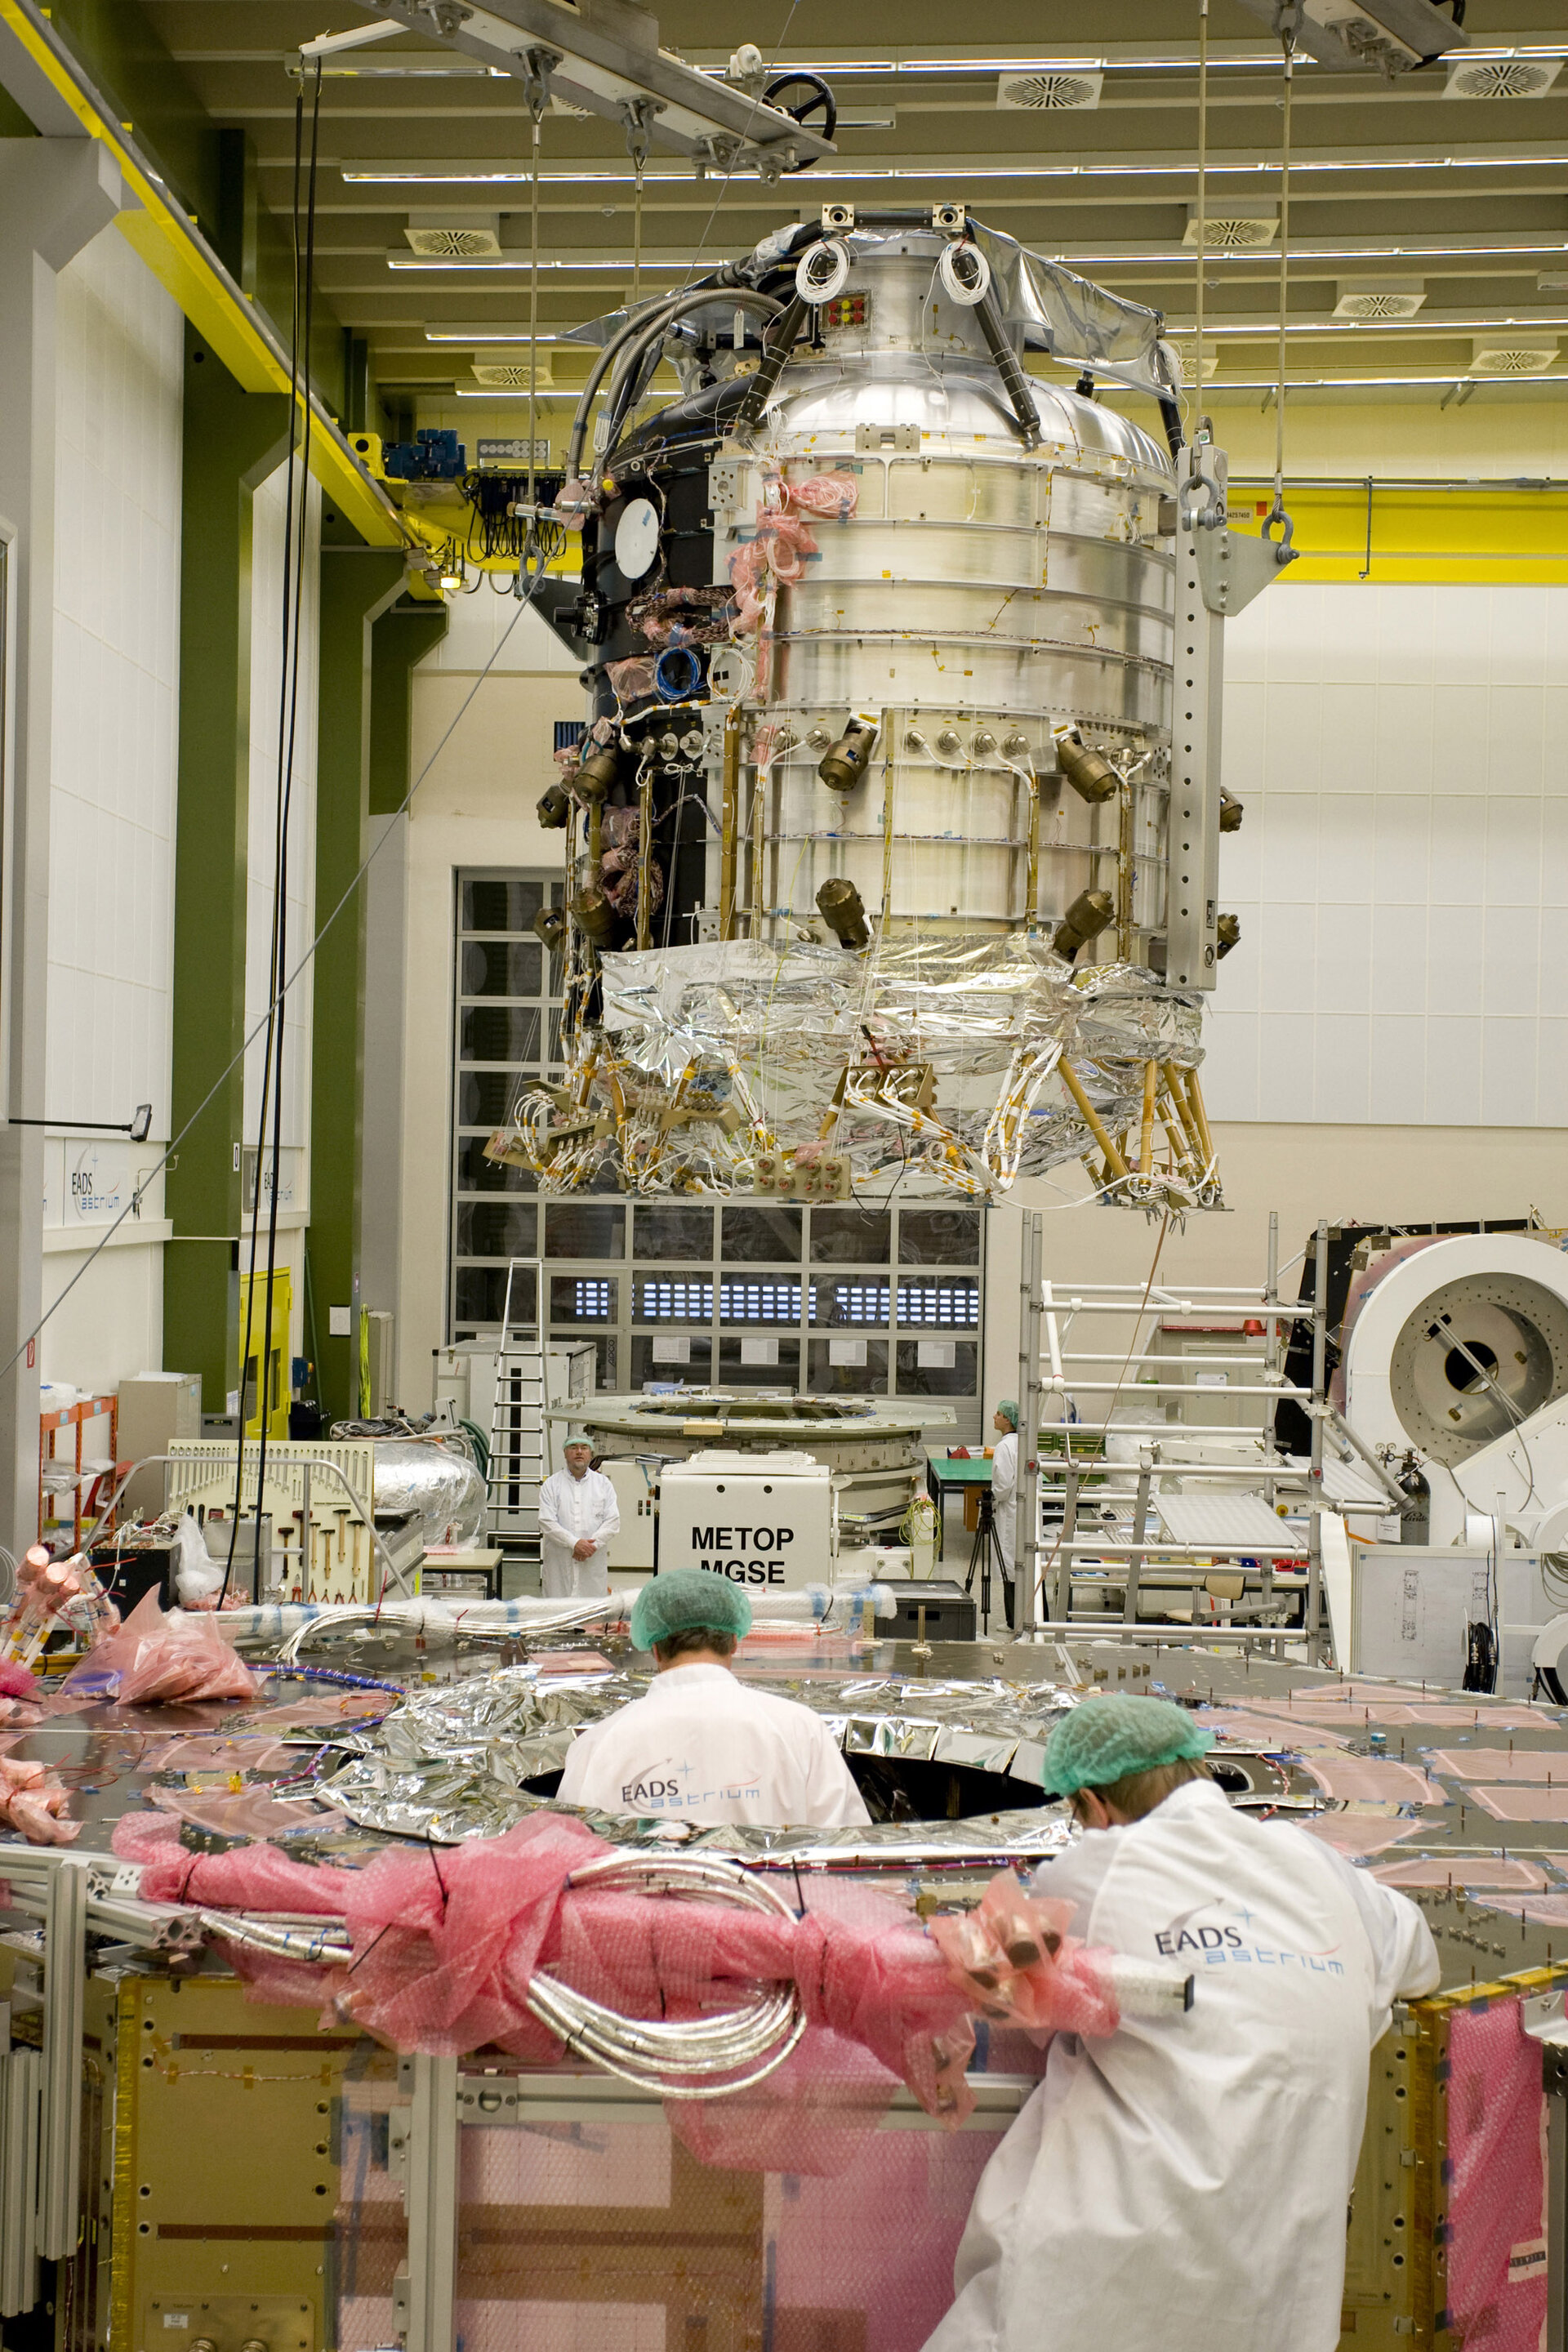 Mating of Herschel's cryostat and service module